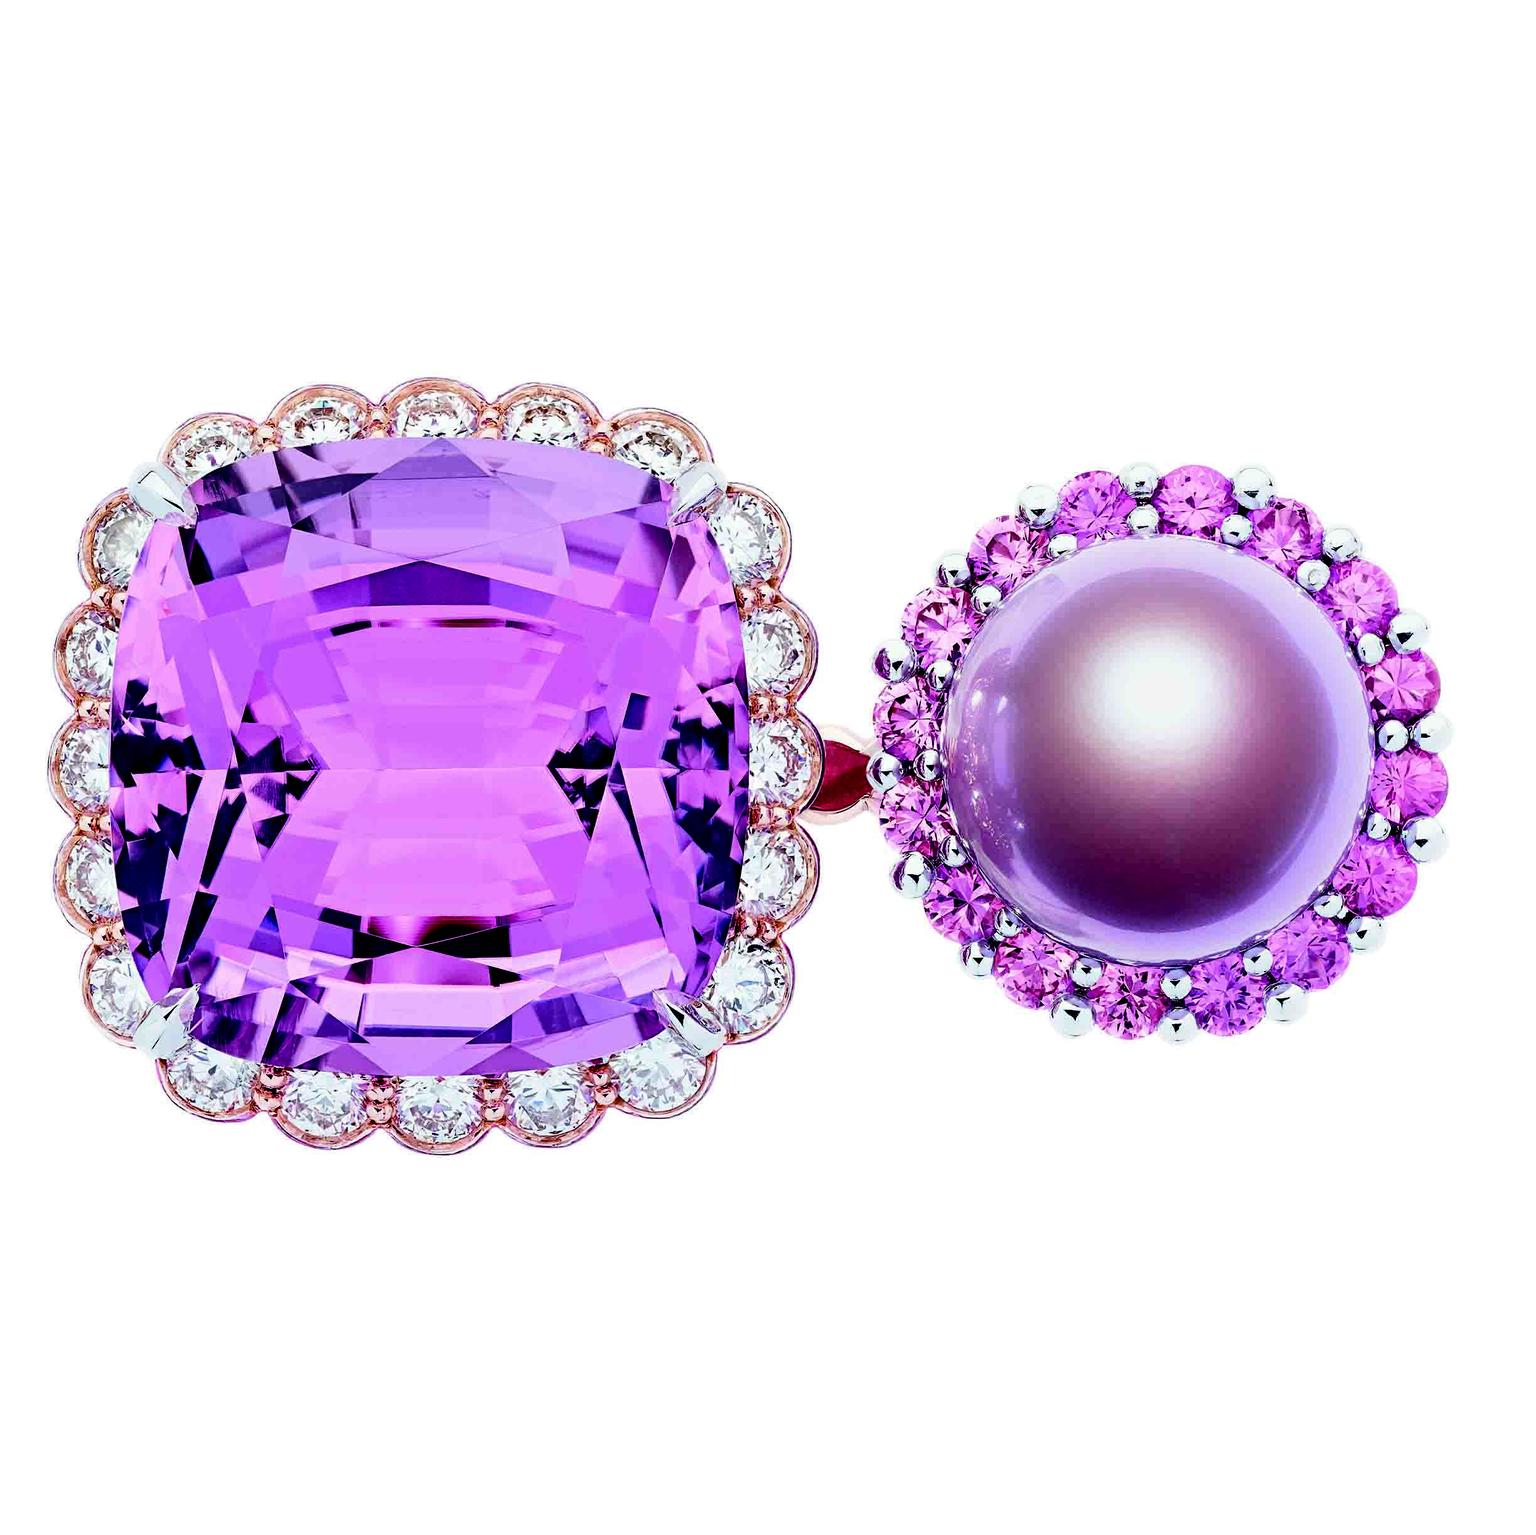 Dior et Moi high jewellery ring with a purple pearl